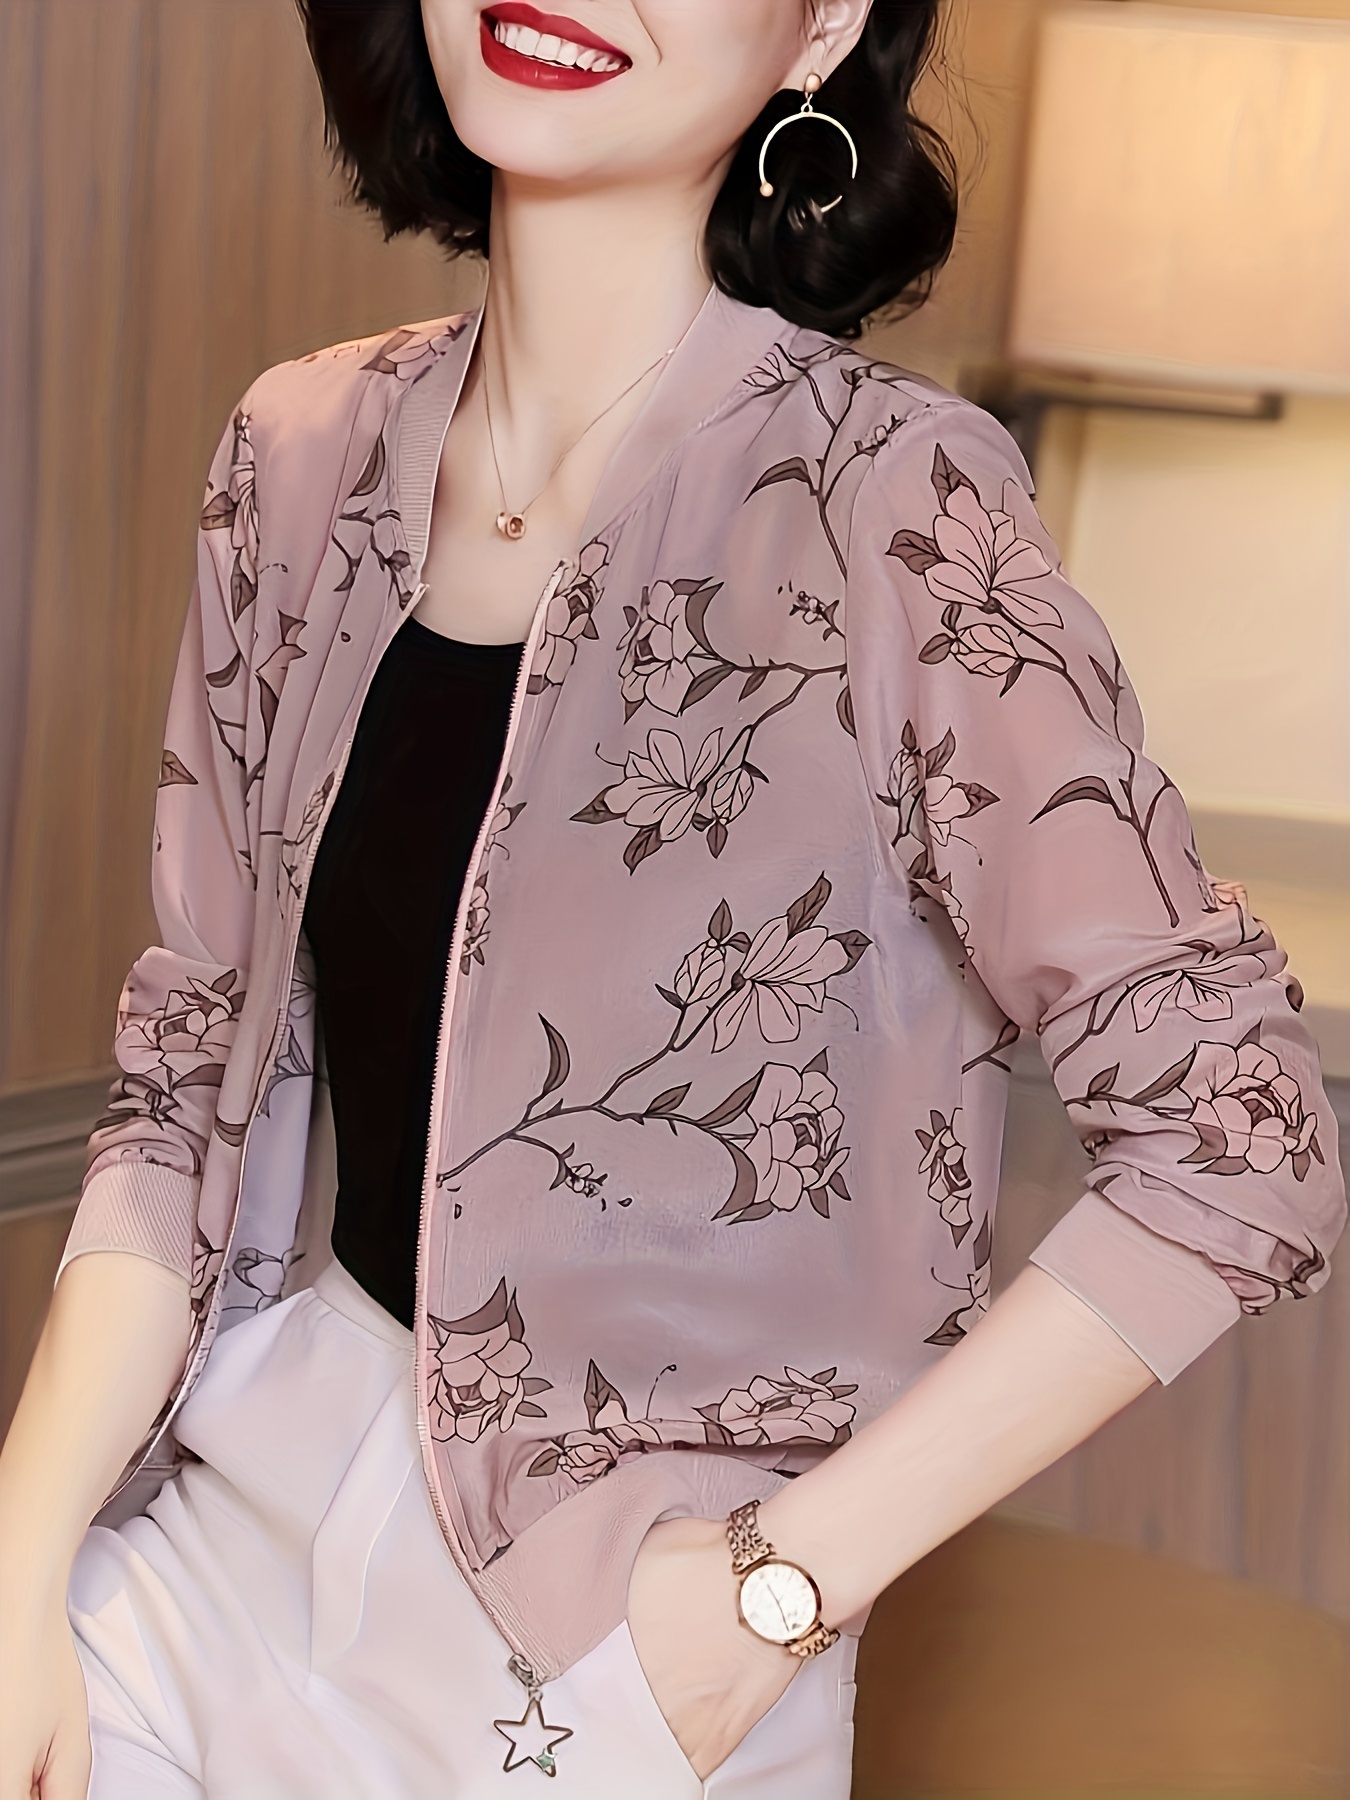 Floral Print White Long-sleeve Zip Jackets for Mom and Me